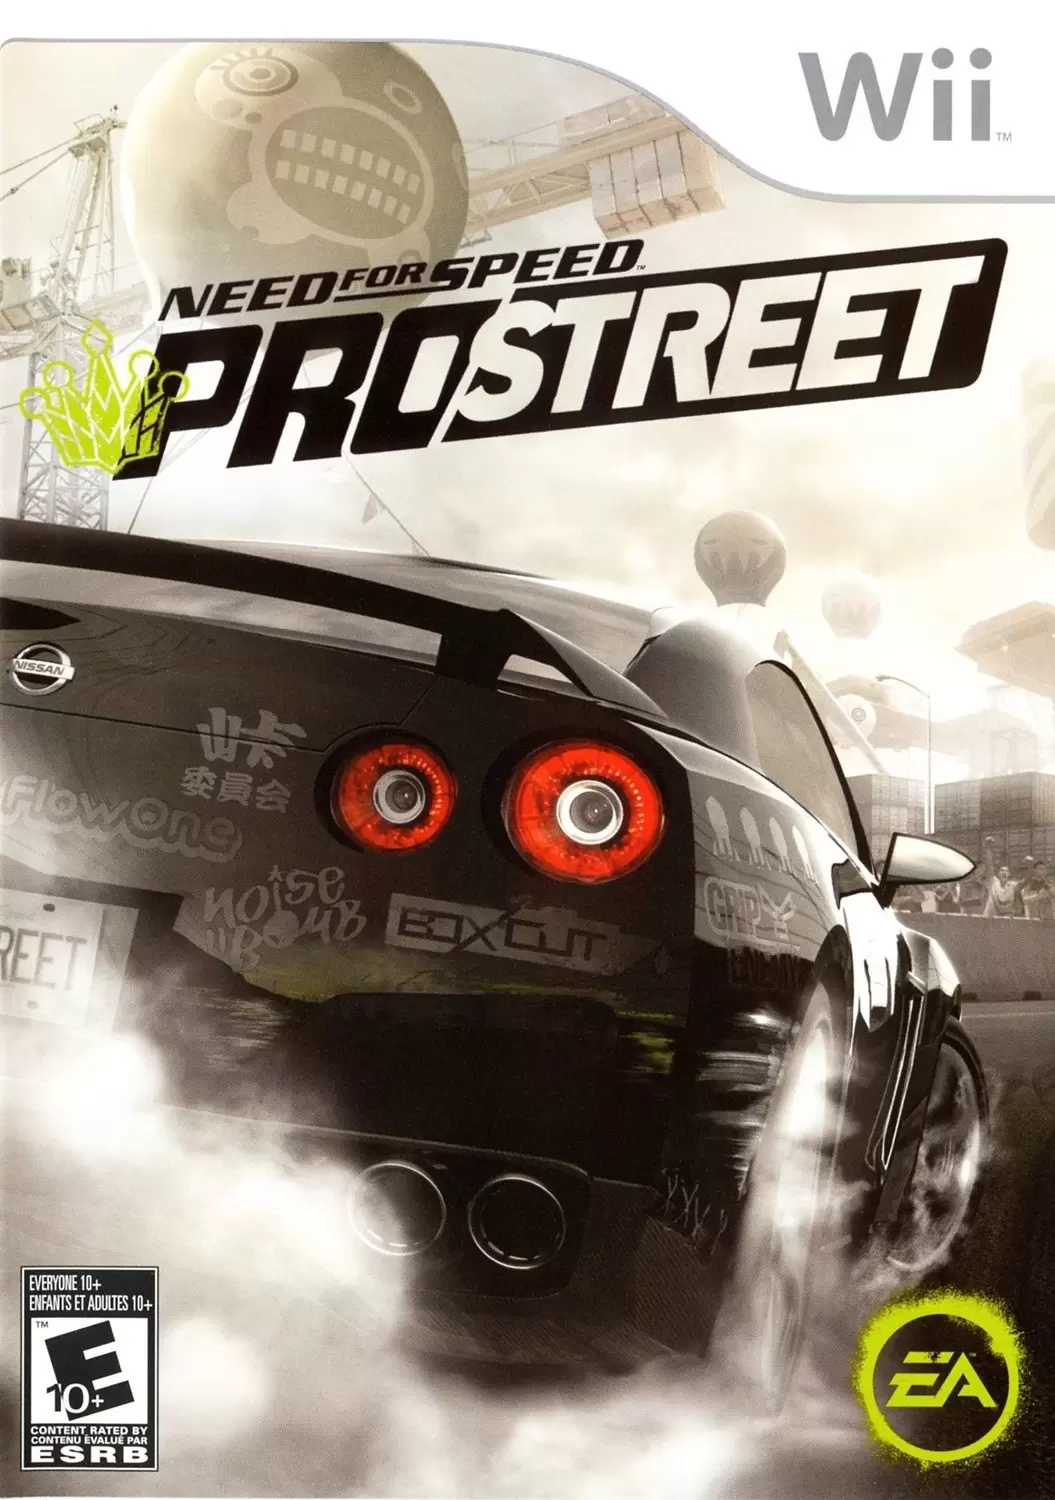 Nintendo Wii Games - Need for Speed: ProStreet